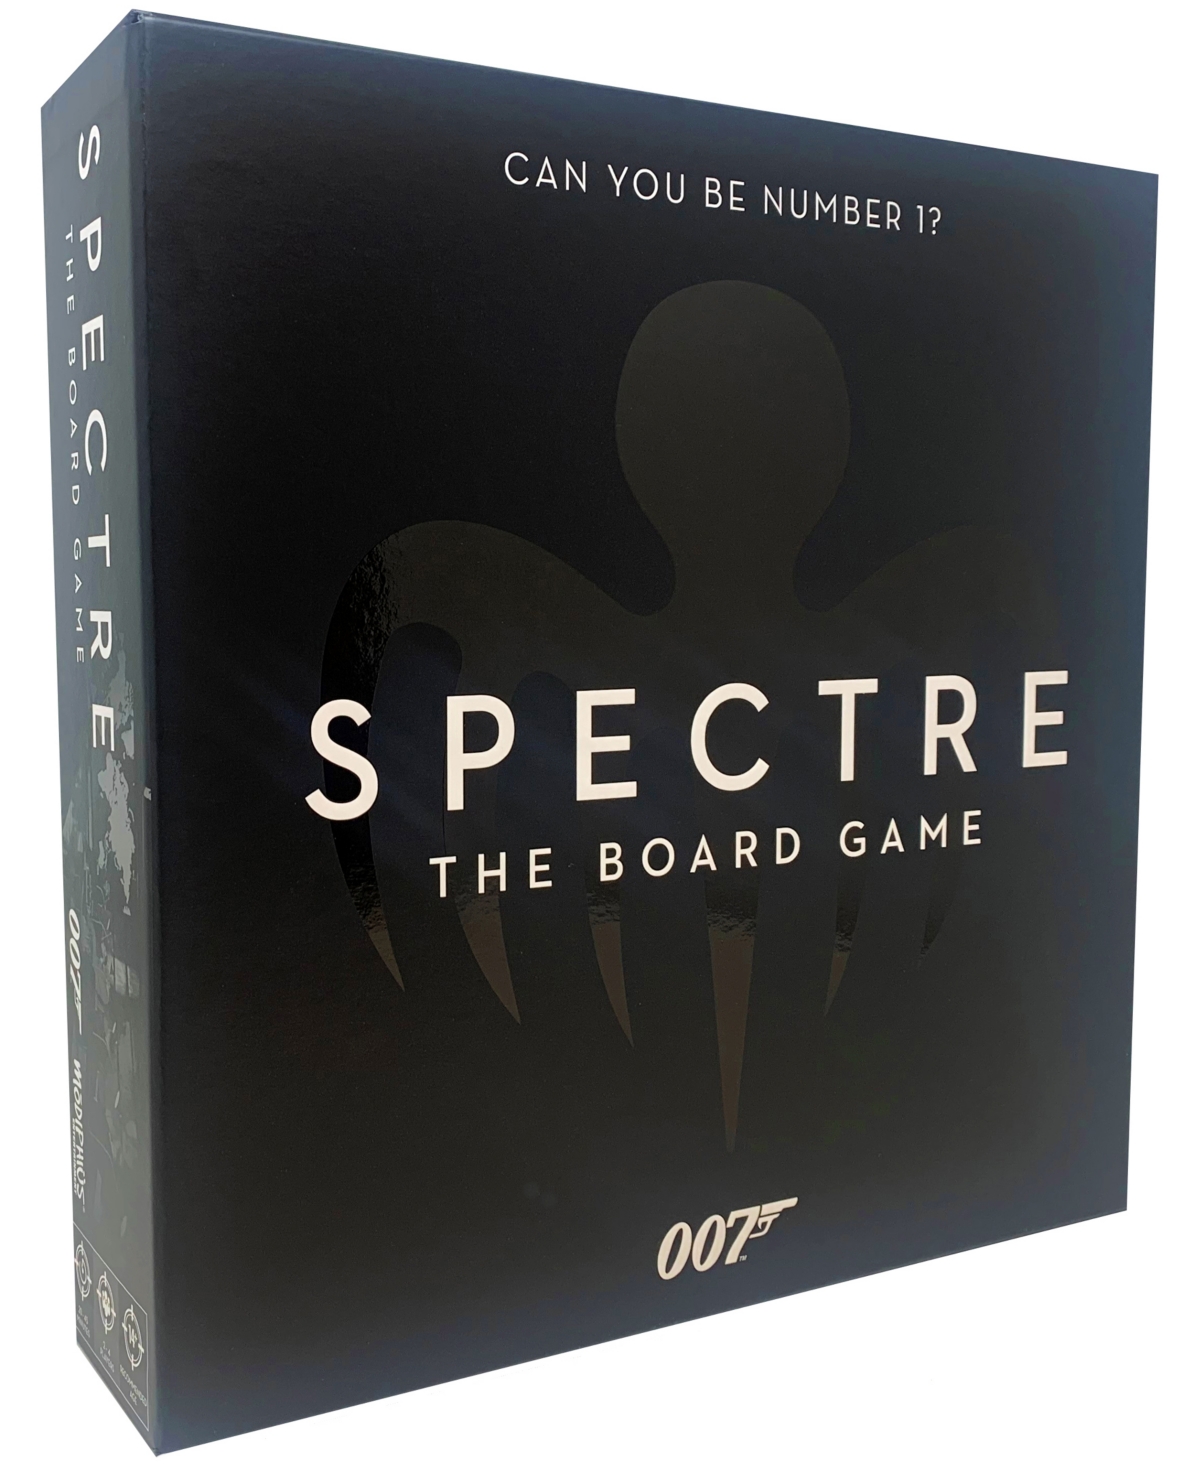 University Games Kids' Modiphius Entertainment Spectre The 007 Board Game In No Color